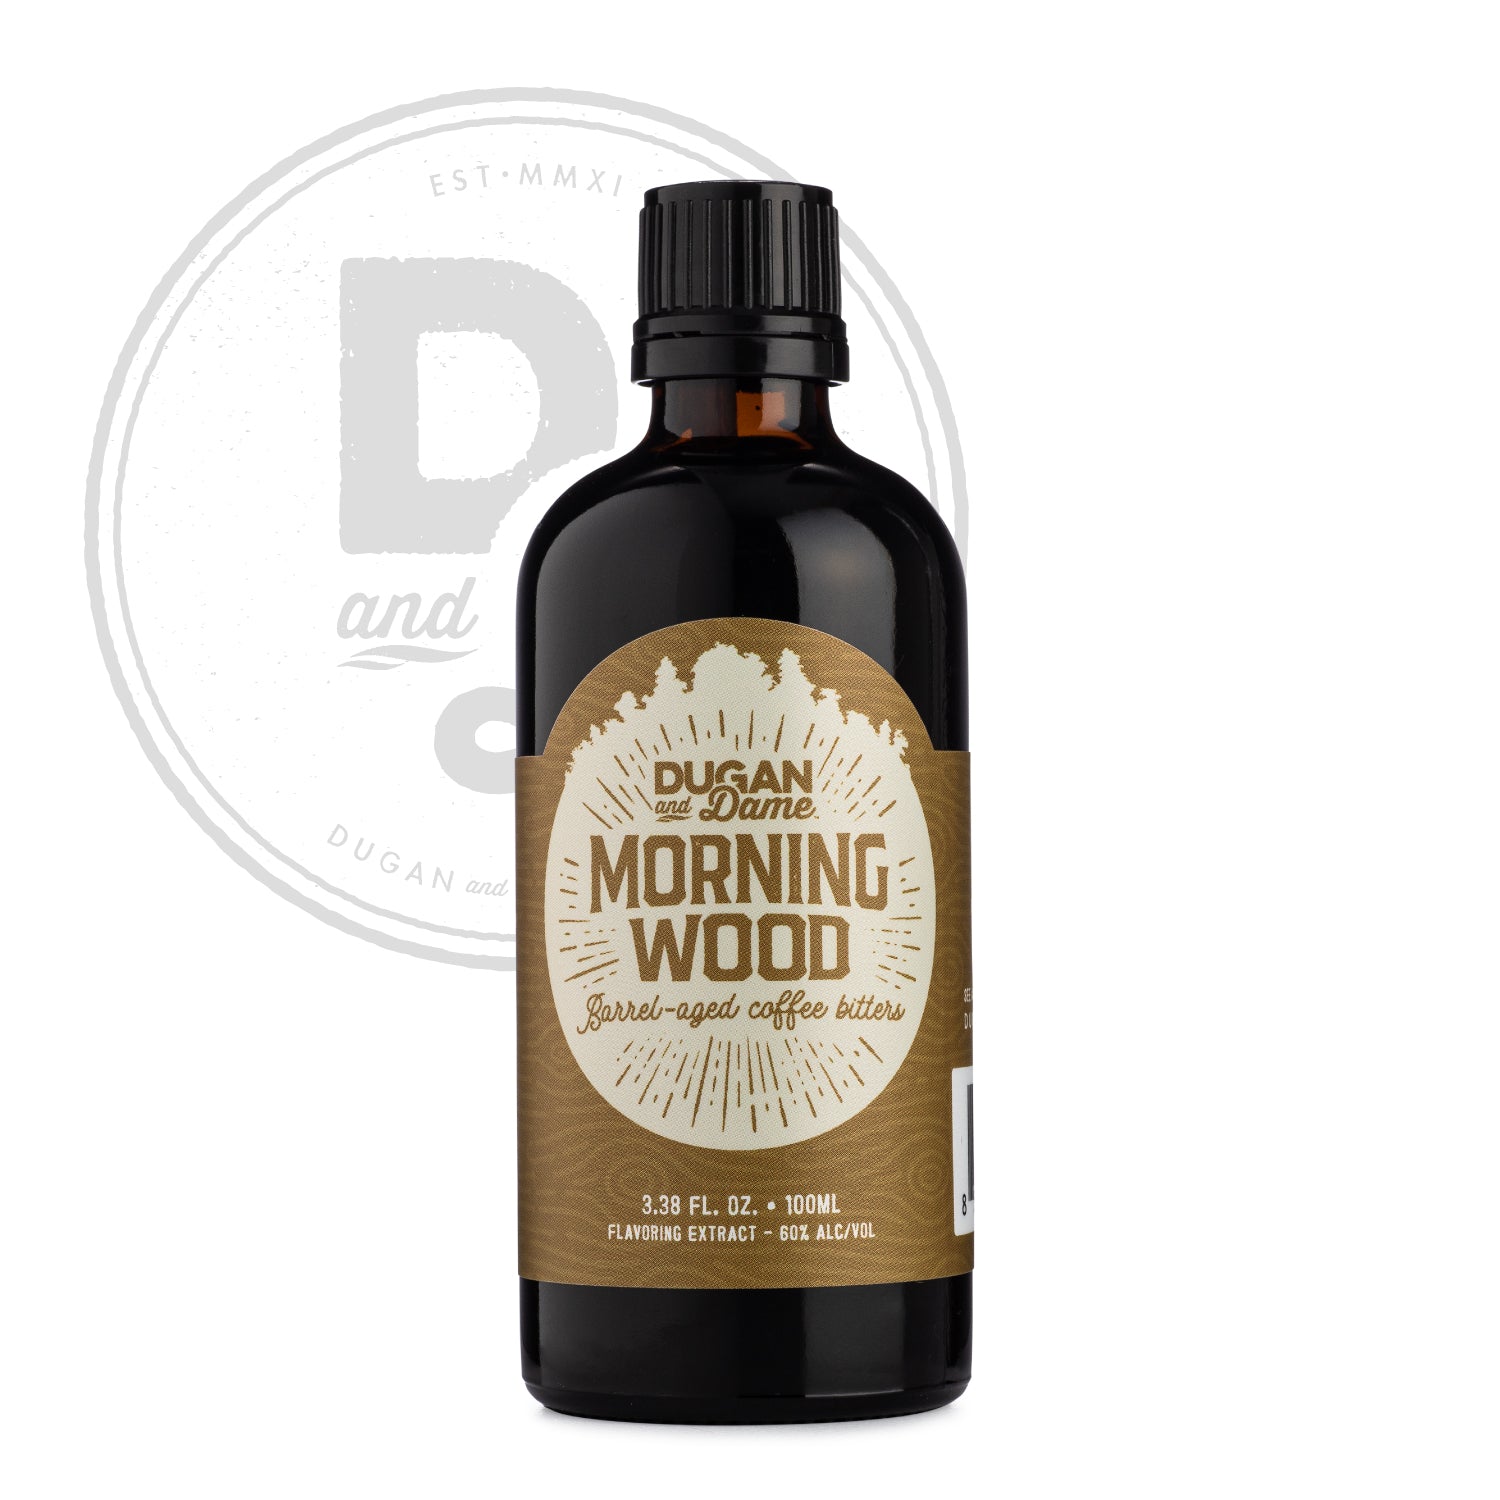 https://cdn.shopify.com/s/files/1/1932/9045/products/DuganAndDame-Morning_Wood_Bitters.jpg?v=1599791709&width=1500